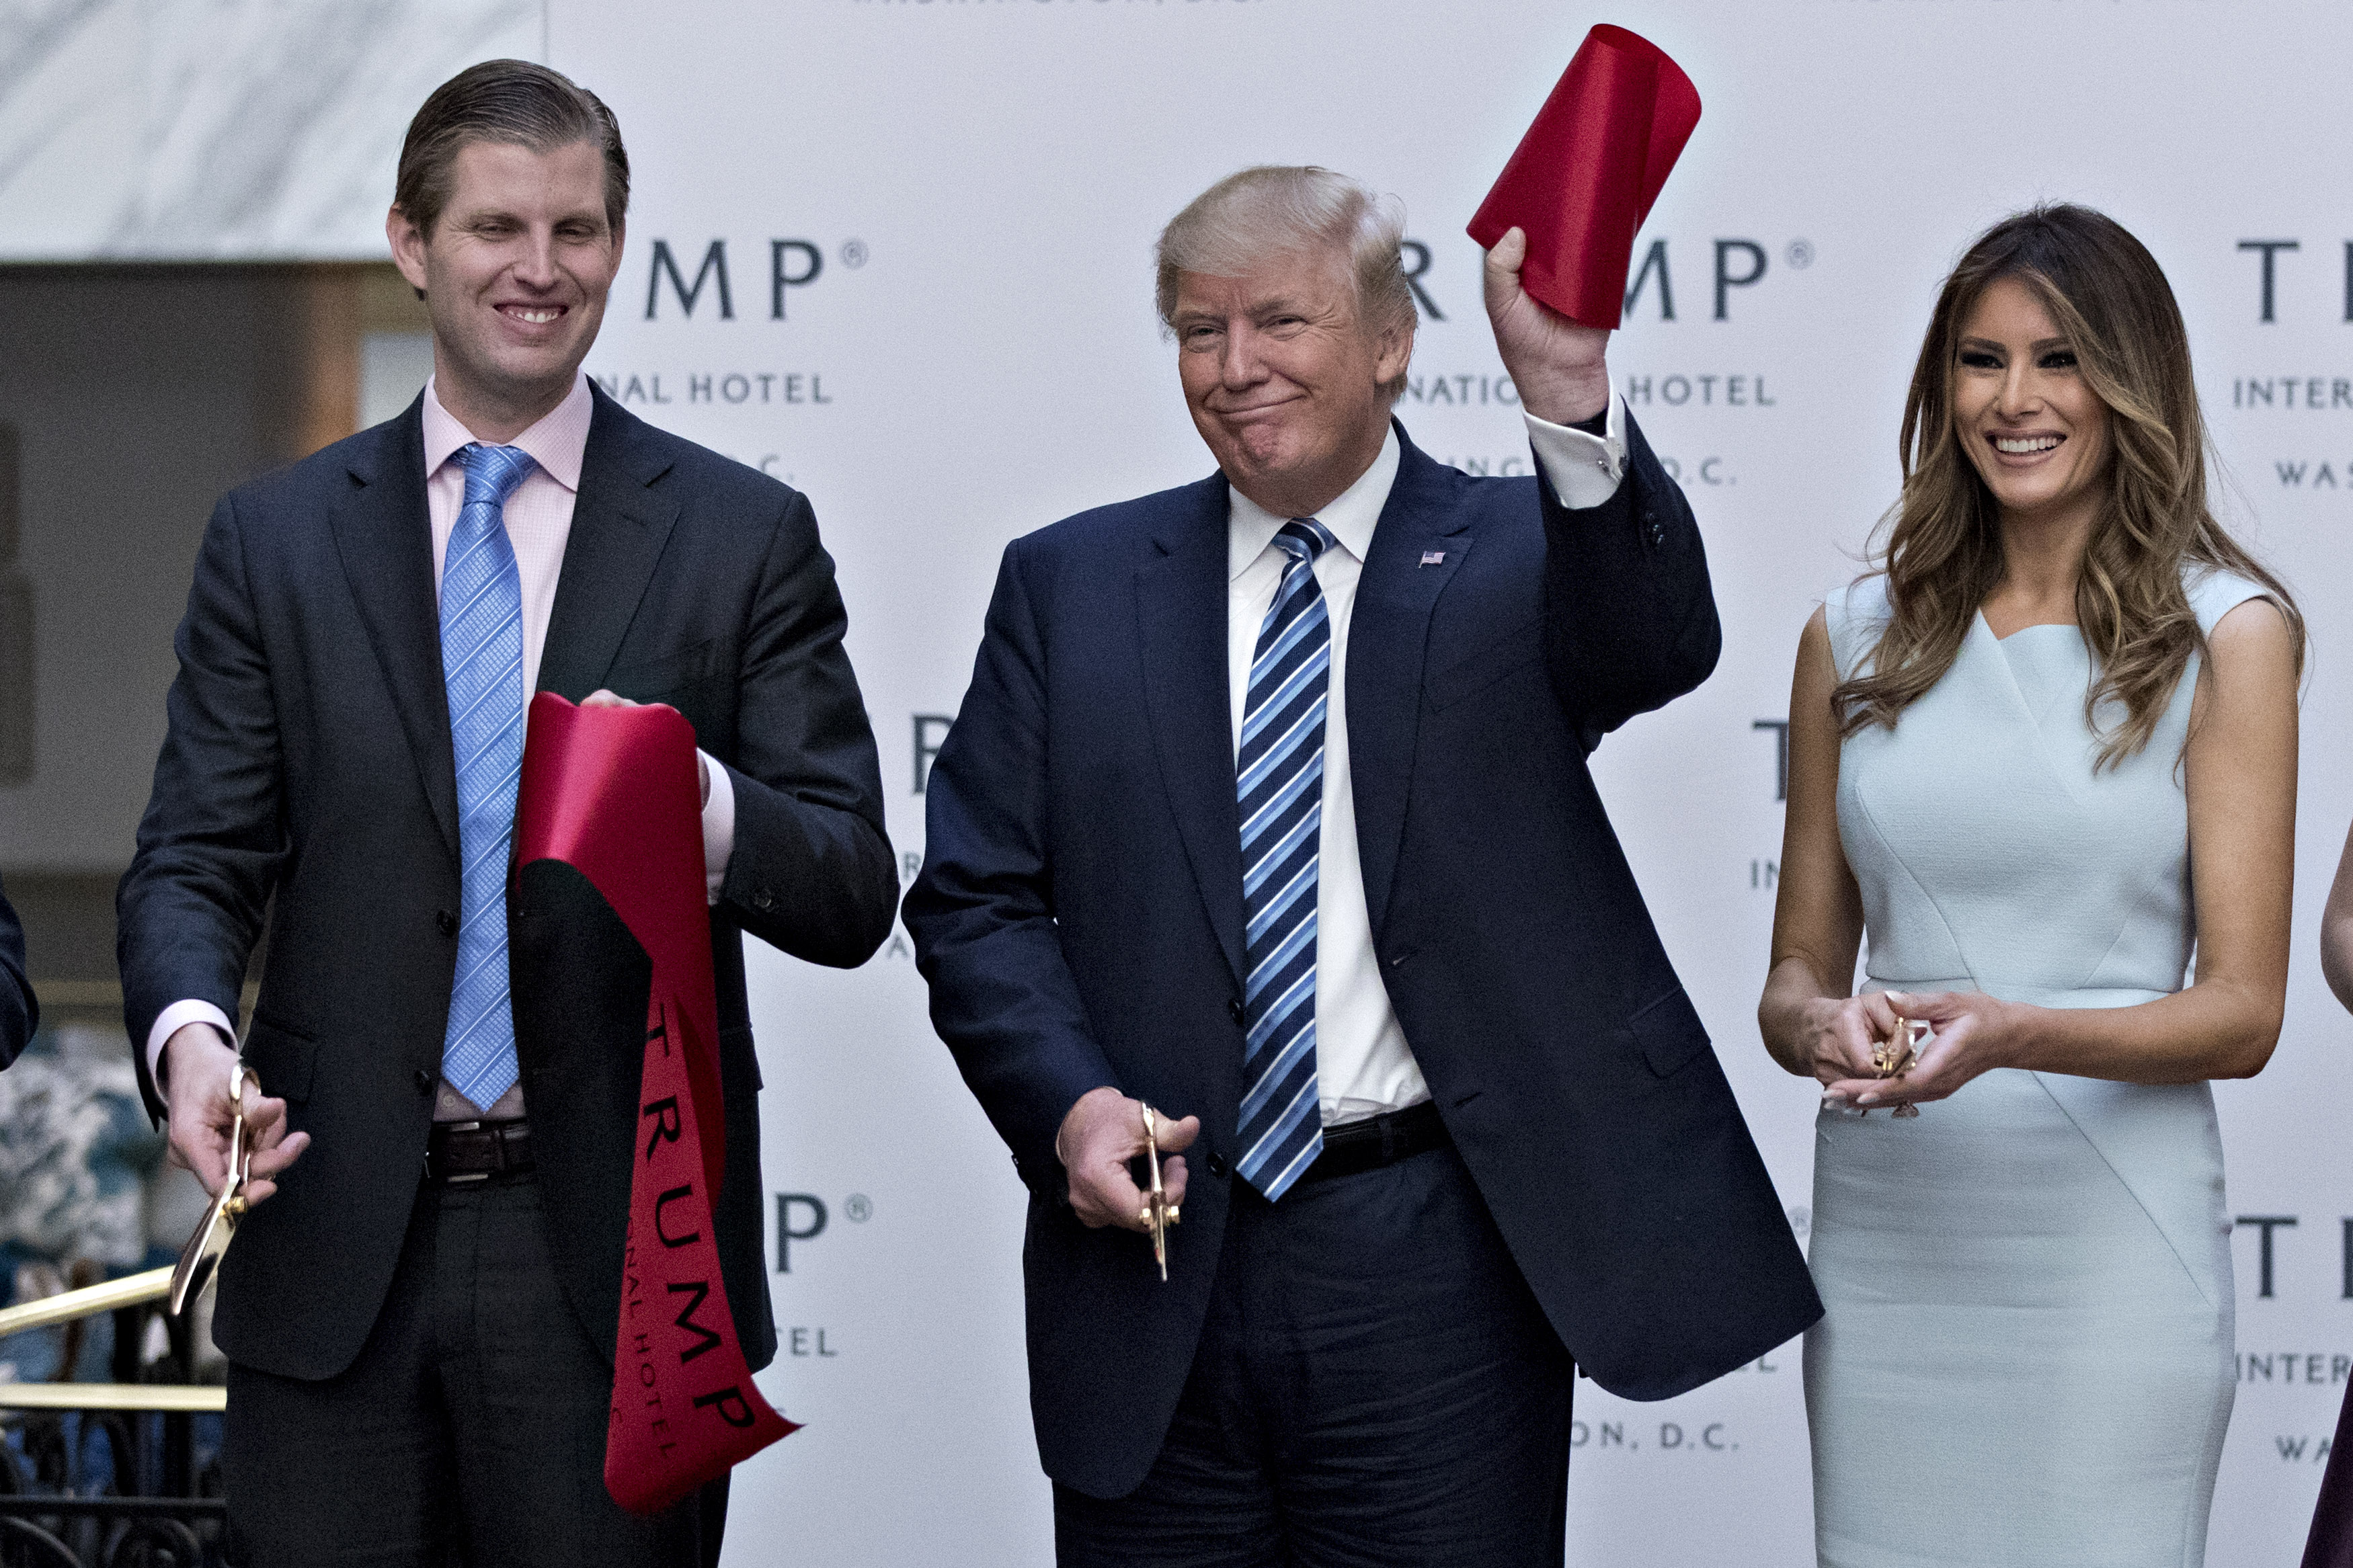 Donald Trump holds a piece of ribbon next to his wife Melania Trump, right, and his son Eric Trump during the grand opening ceremony of the Trump International Hotel in Washington, D.C., U.S., on Wednesday, Oct. 26, 2016. (Andrew Harrer—Bloomberg /Getty Images)